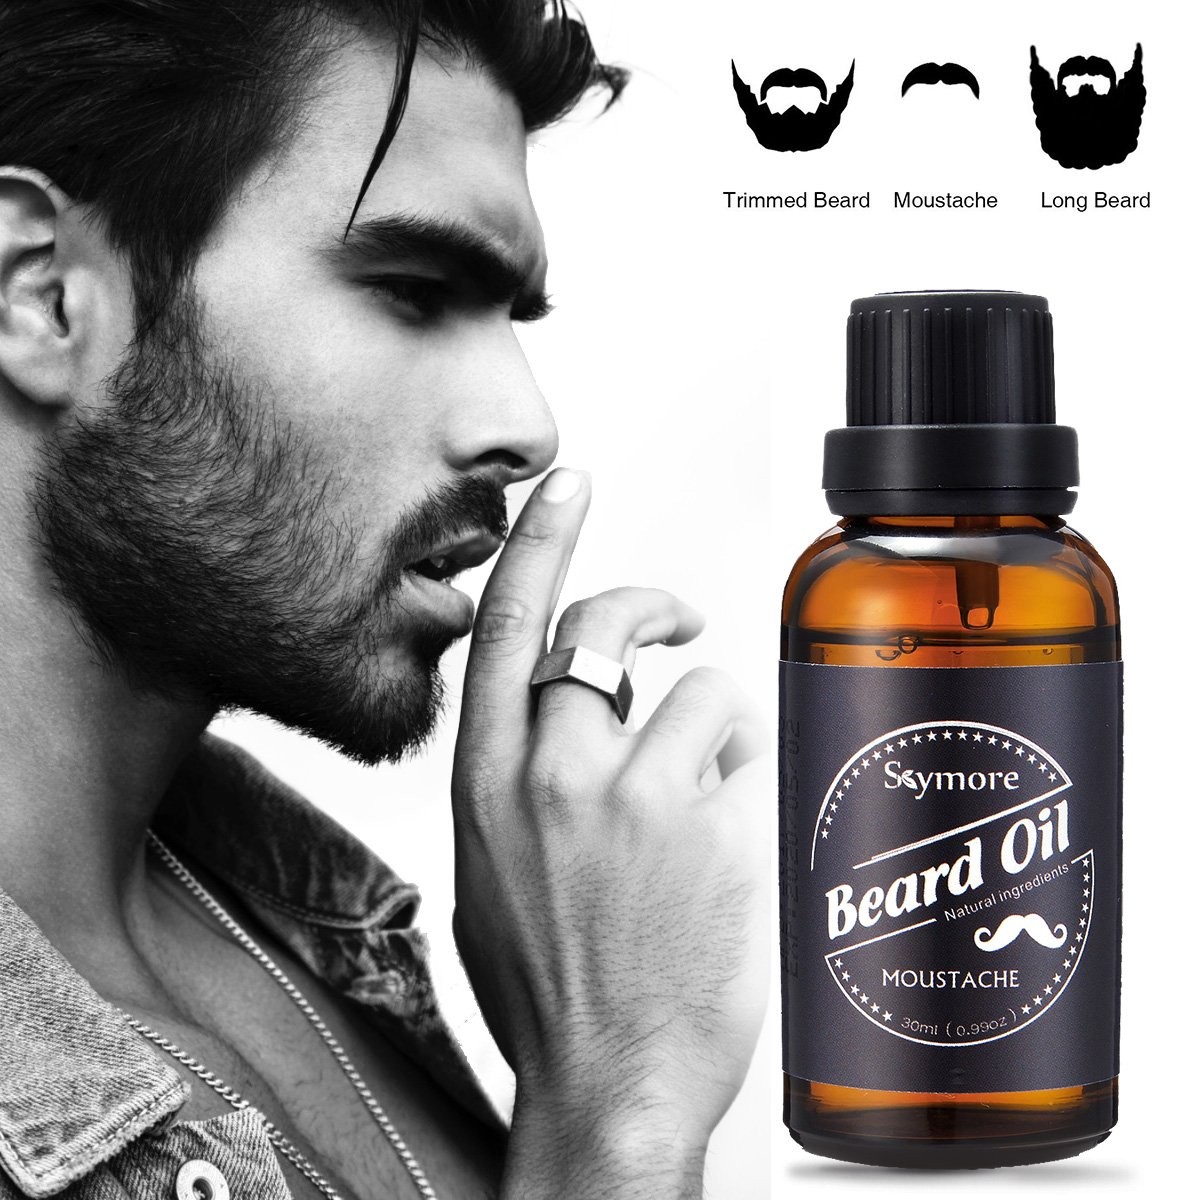 Skymore 30ml Beard Care Oil, 100% Pure Blend of Natural Ingredients, Beard Growth & Mustache Care